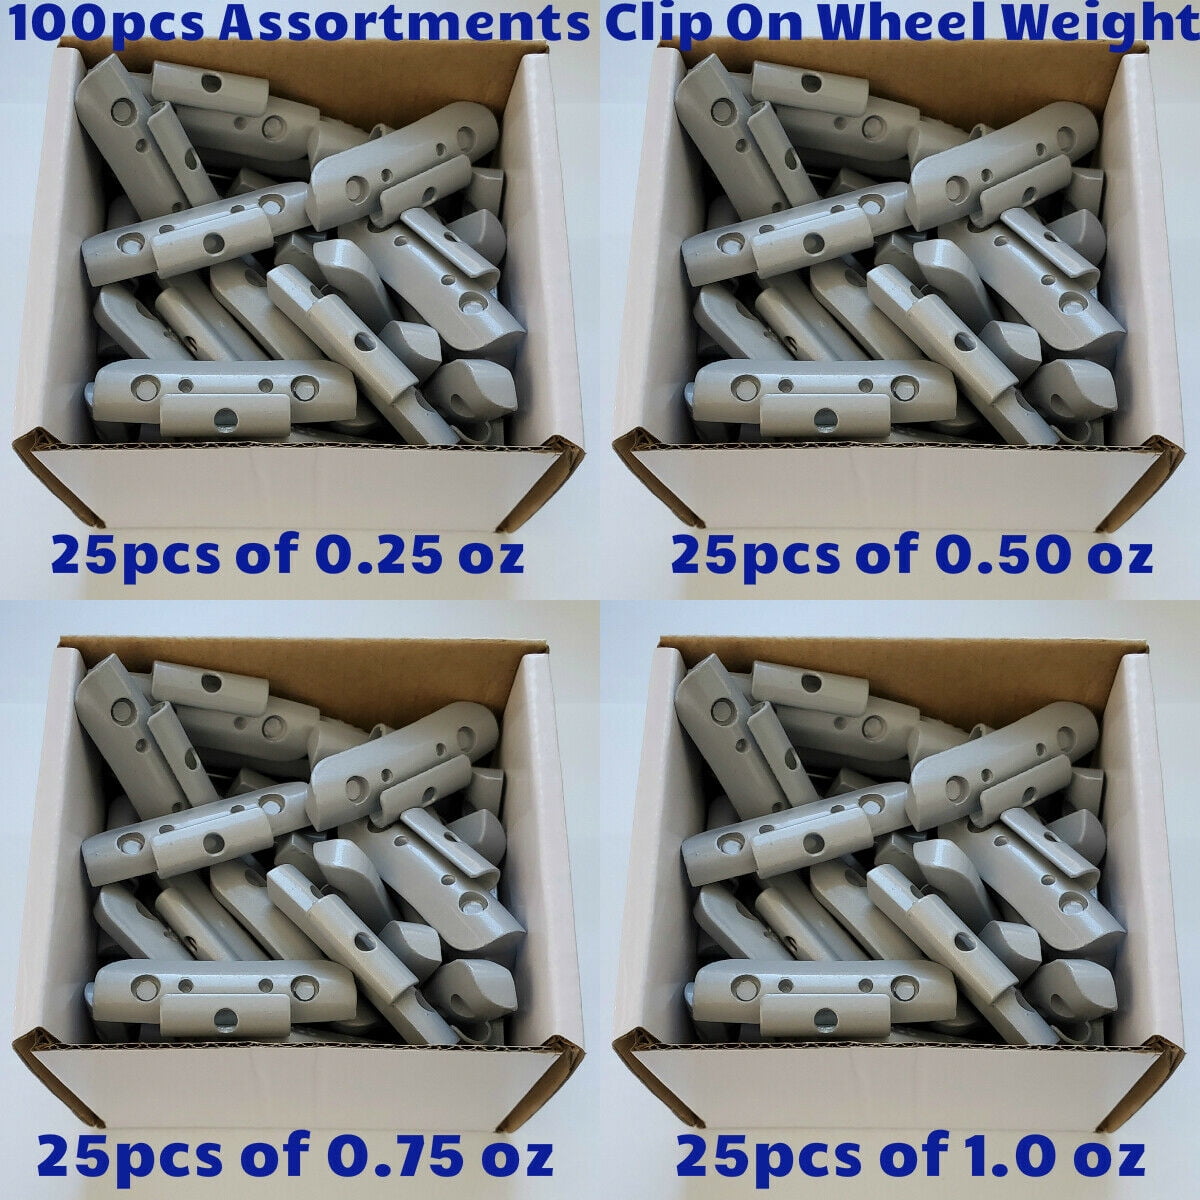 Tire Balancing Alloy Wheel Weights Type AW Clip On .50 oz 50 PCs 